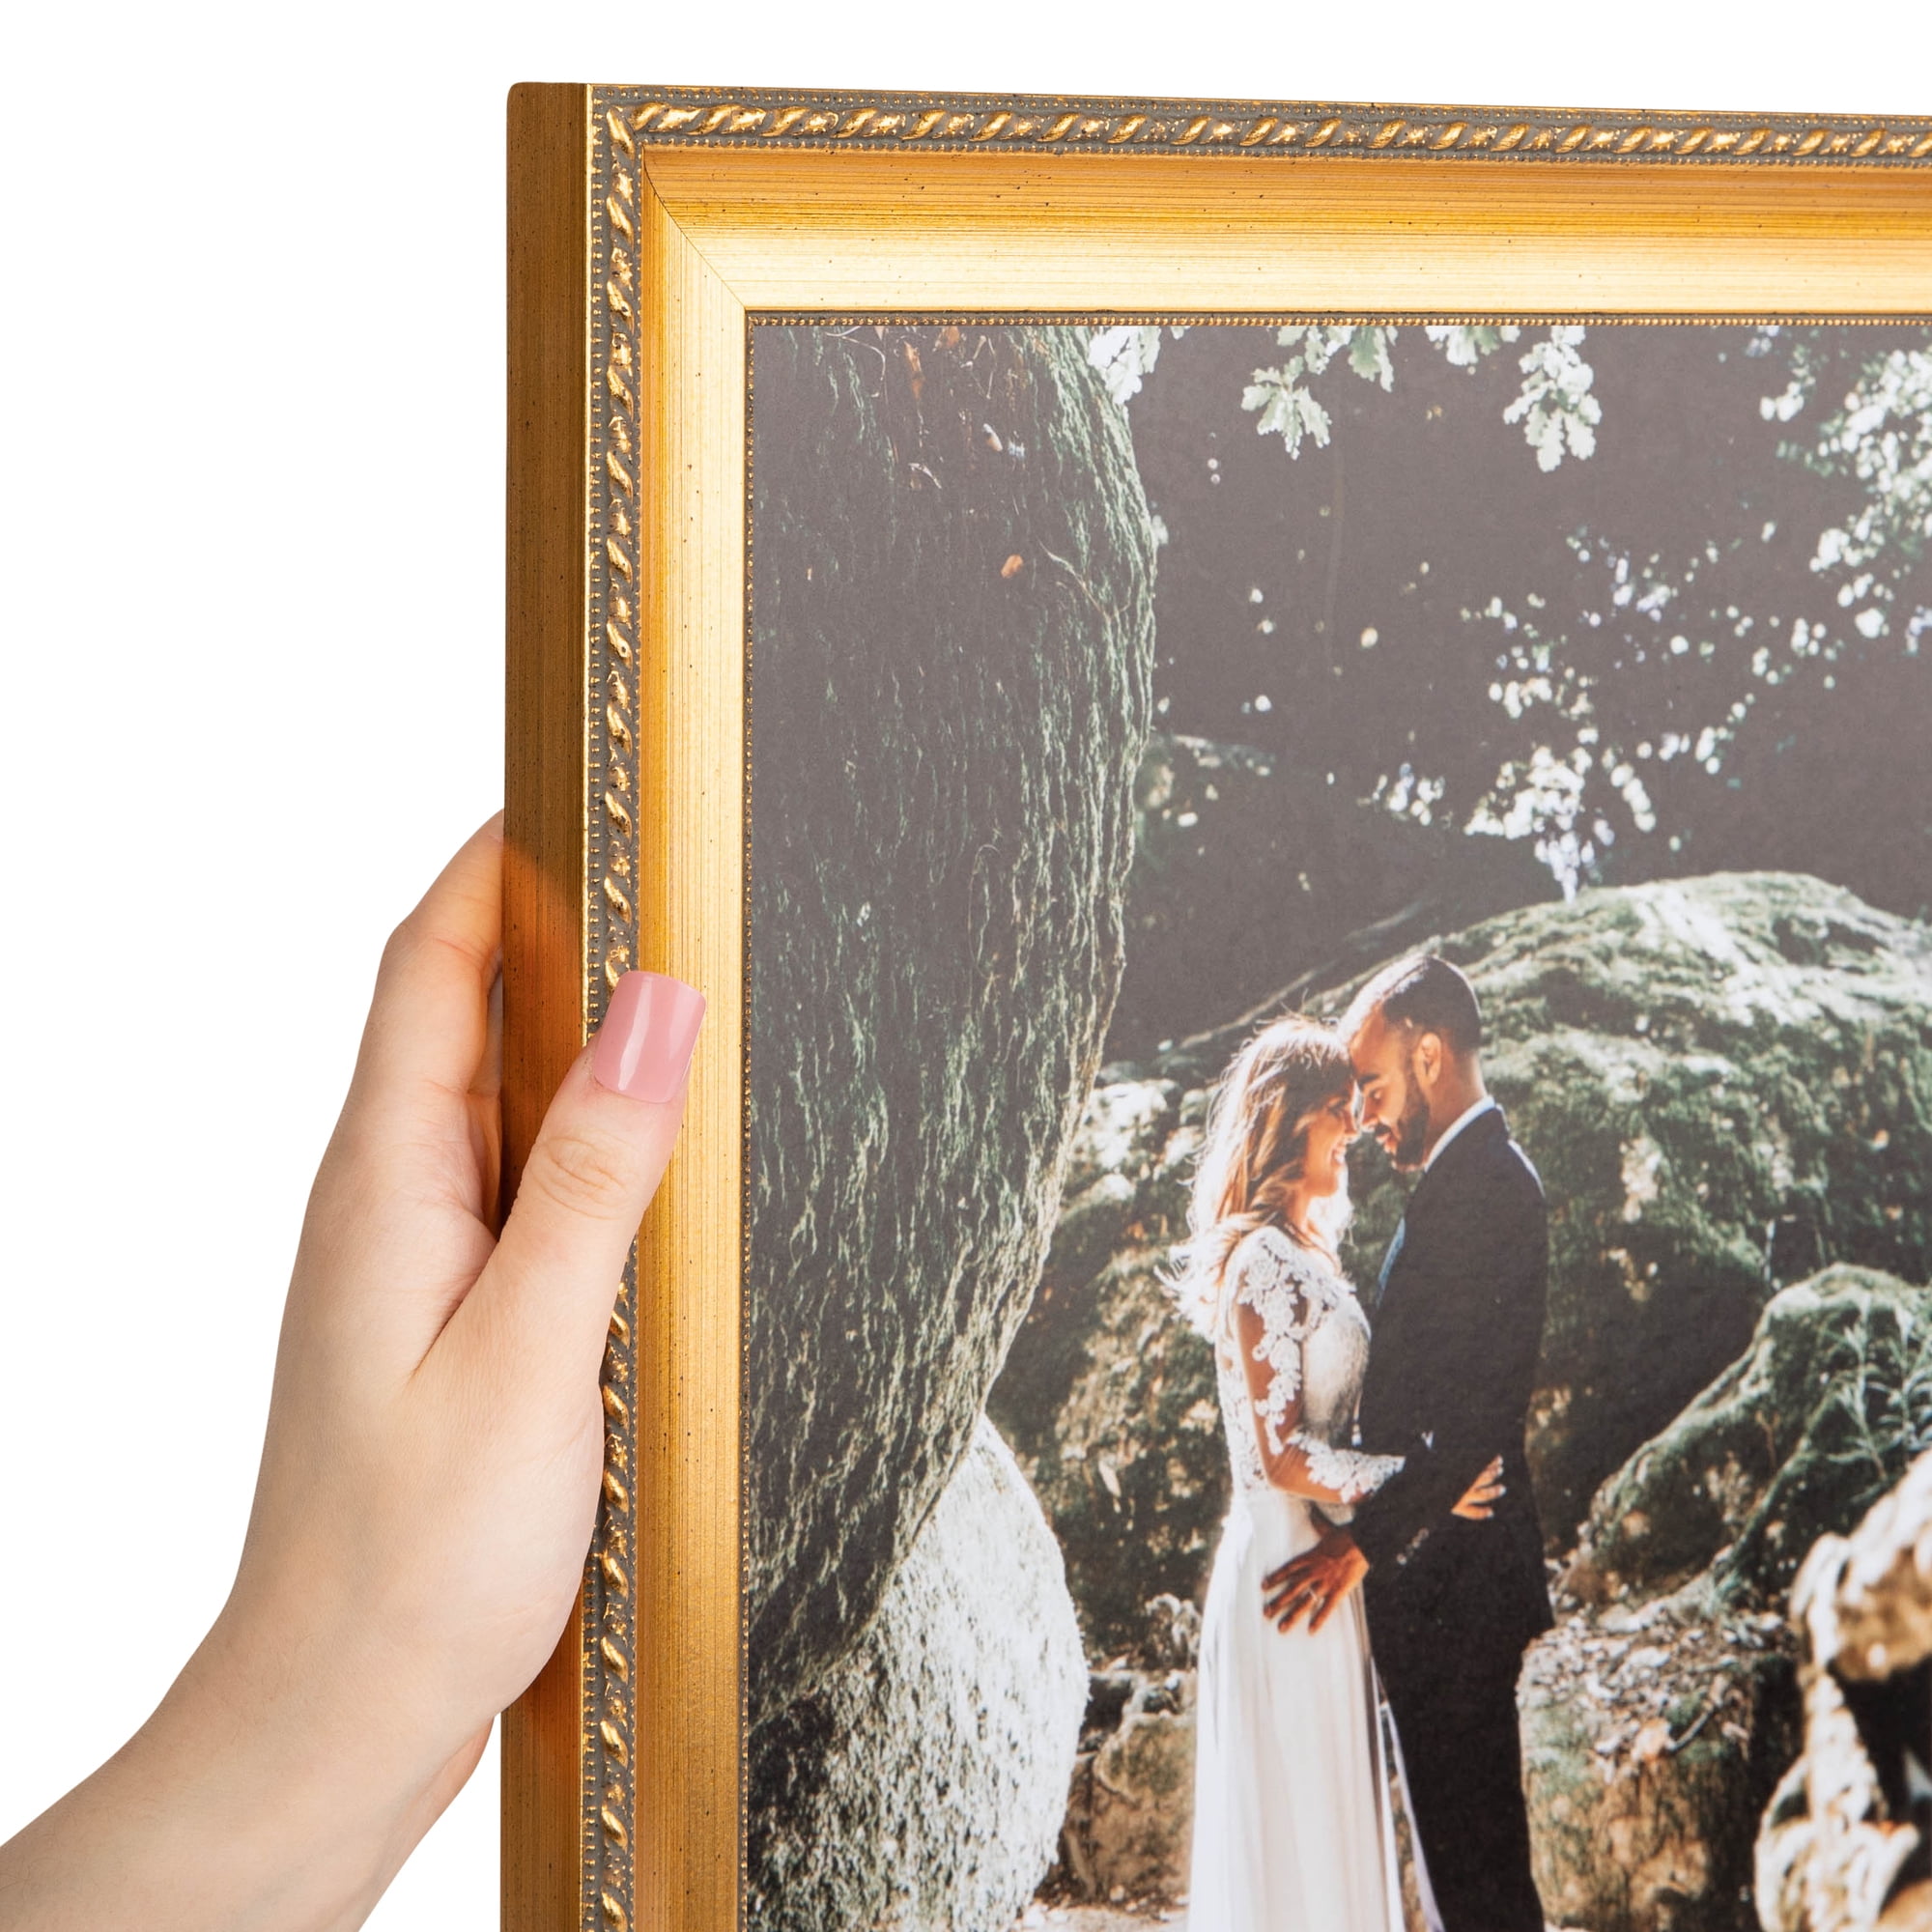 ArtToFrames 4x6 inch Gold Picture Frame, This Gold Wood Poster Frame Is Great for Your Art or Photos, Comes with Regular Glass (4901), Size: 4 x 6